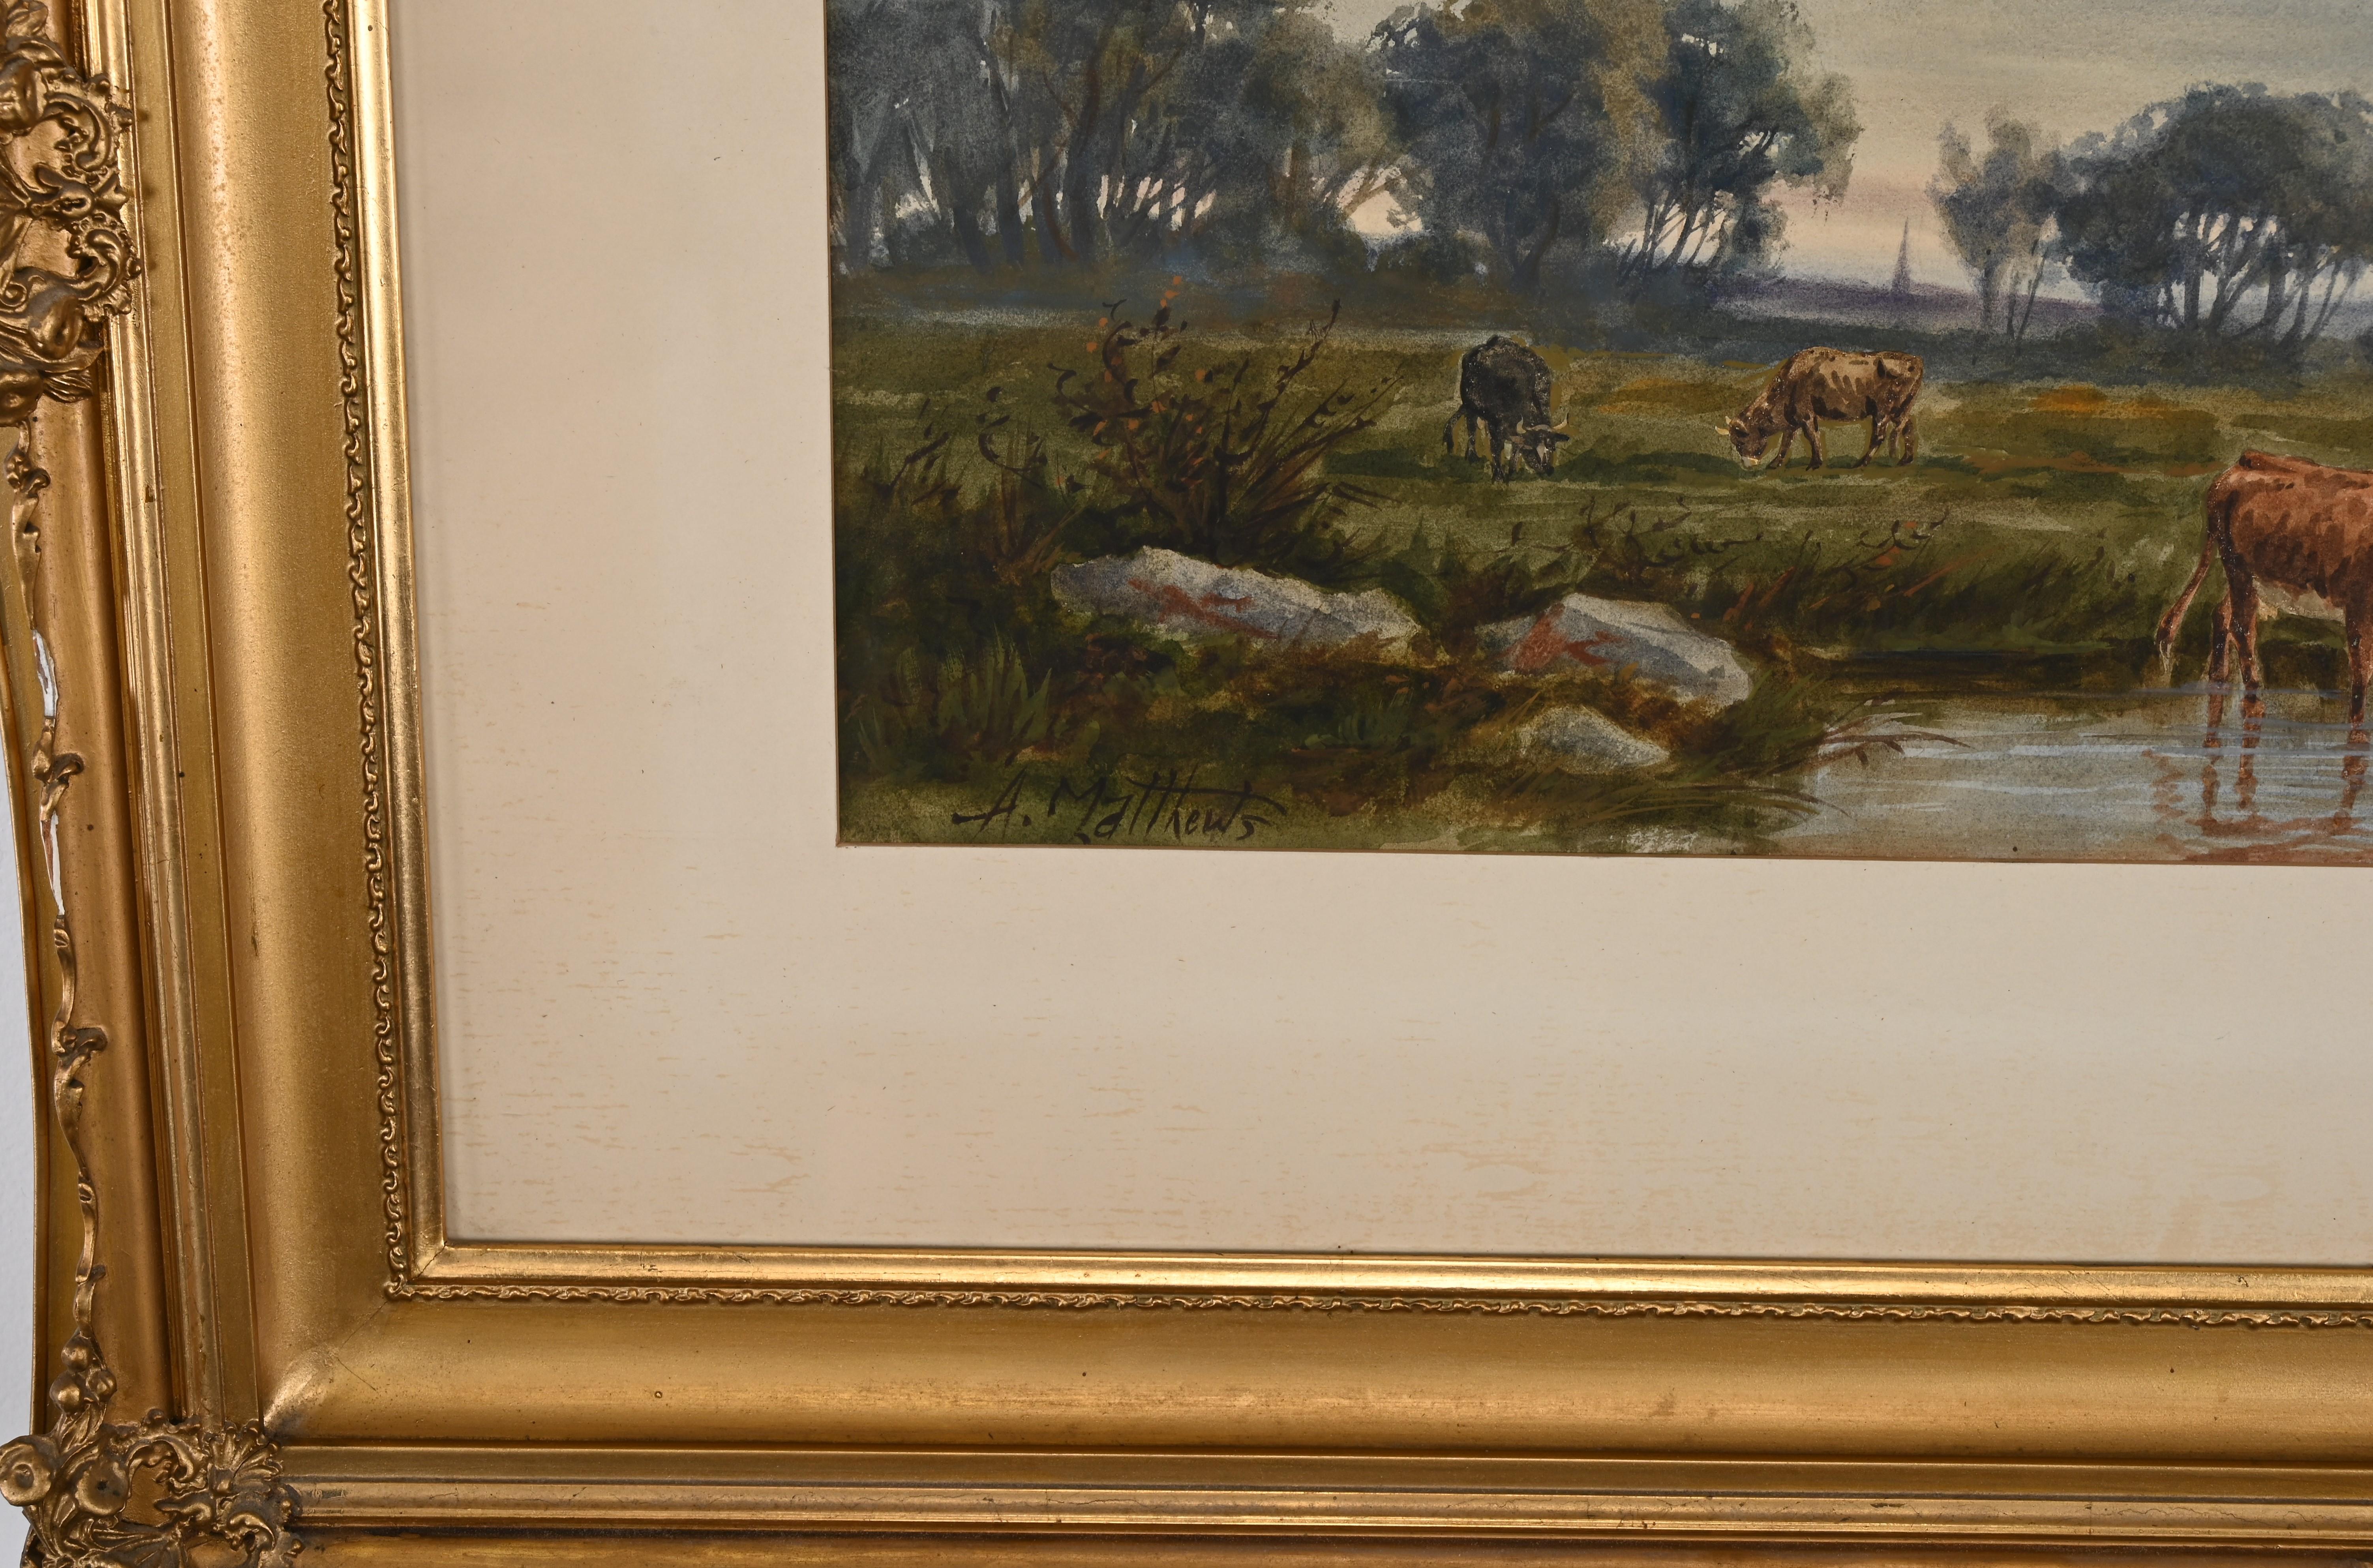 Late Victorian Watercolor Painting of a Landscape with Cattle Watering by A. Matthews